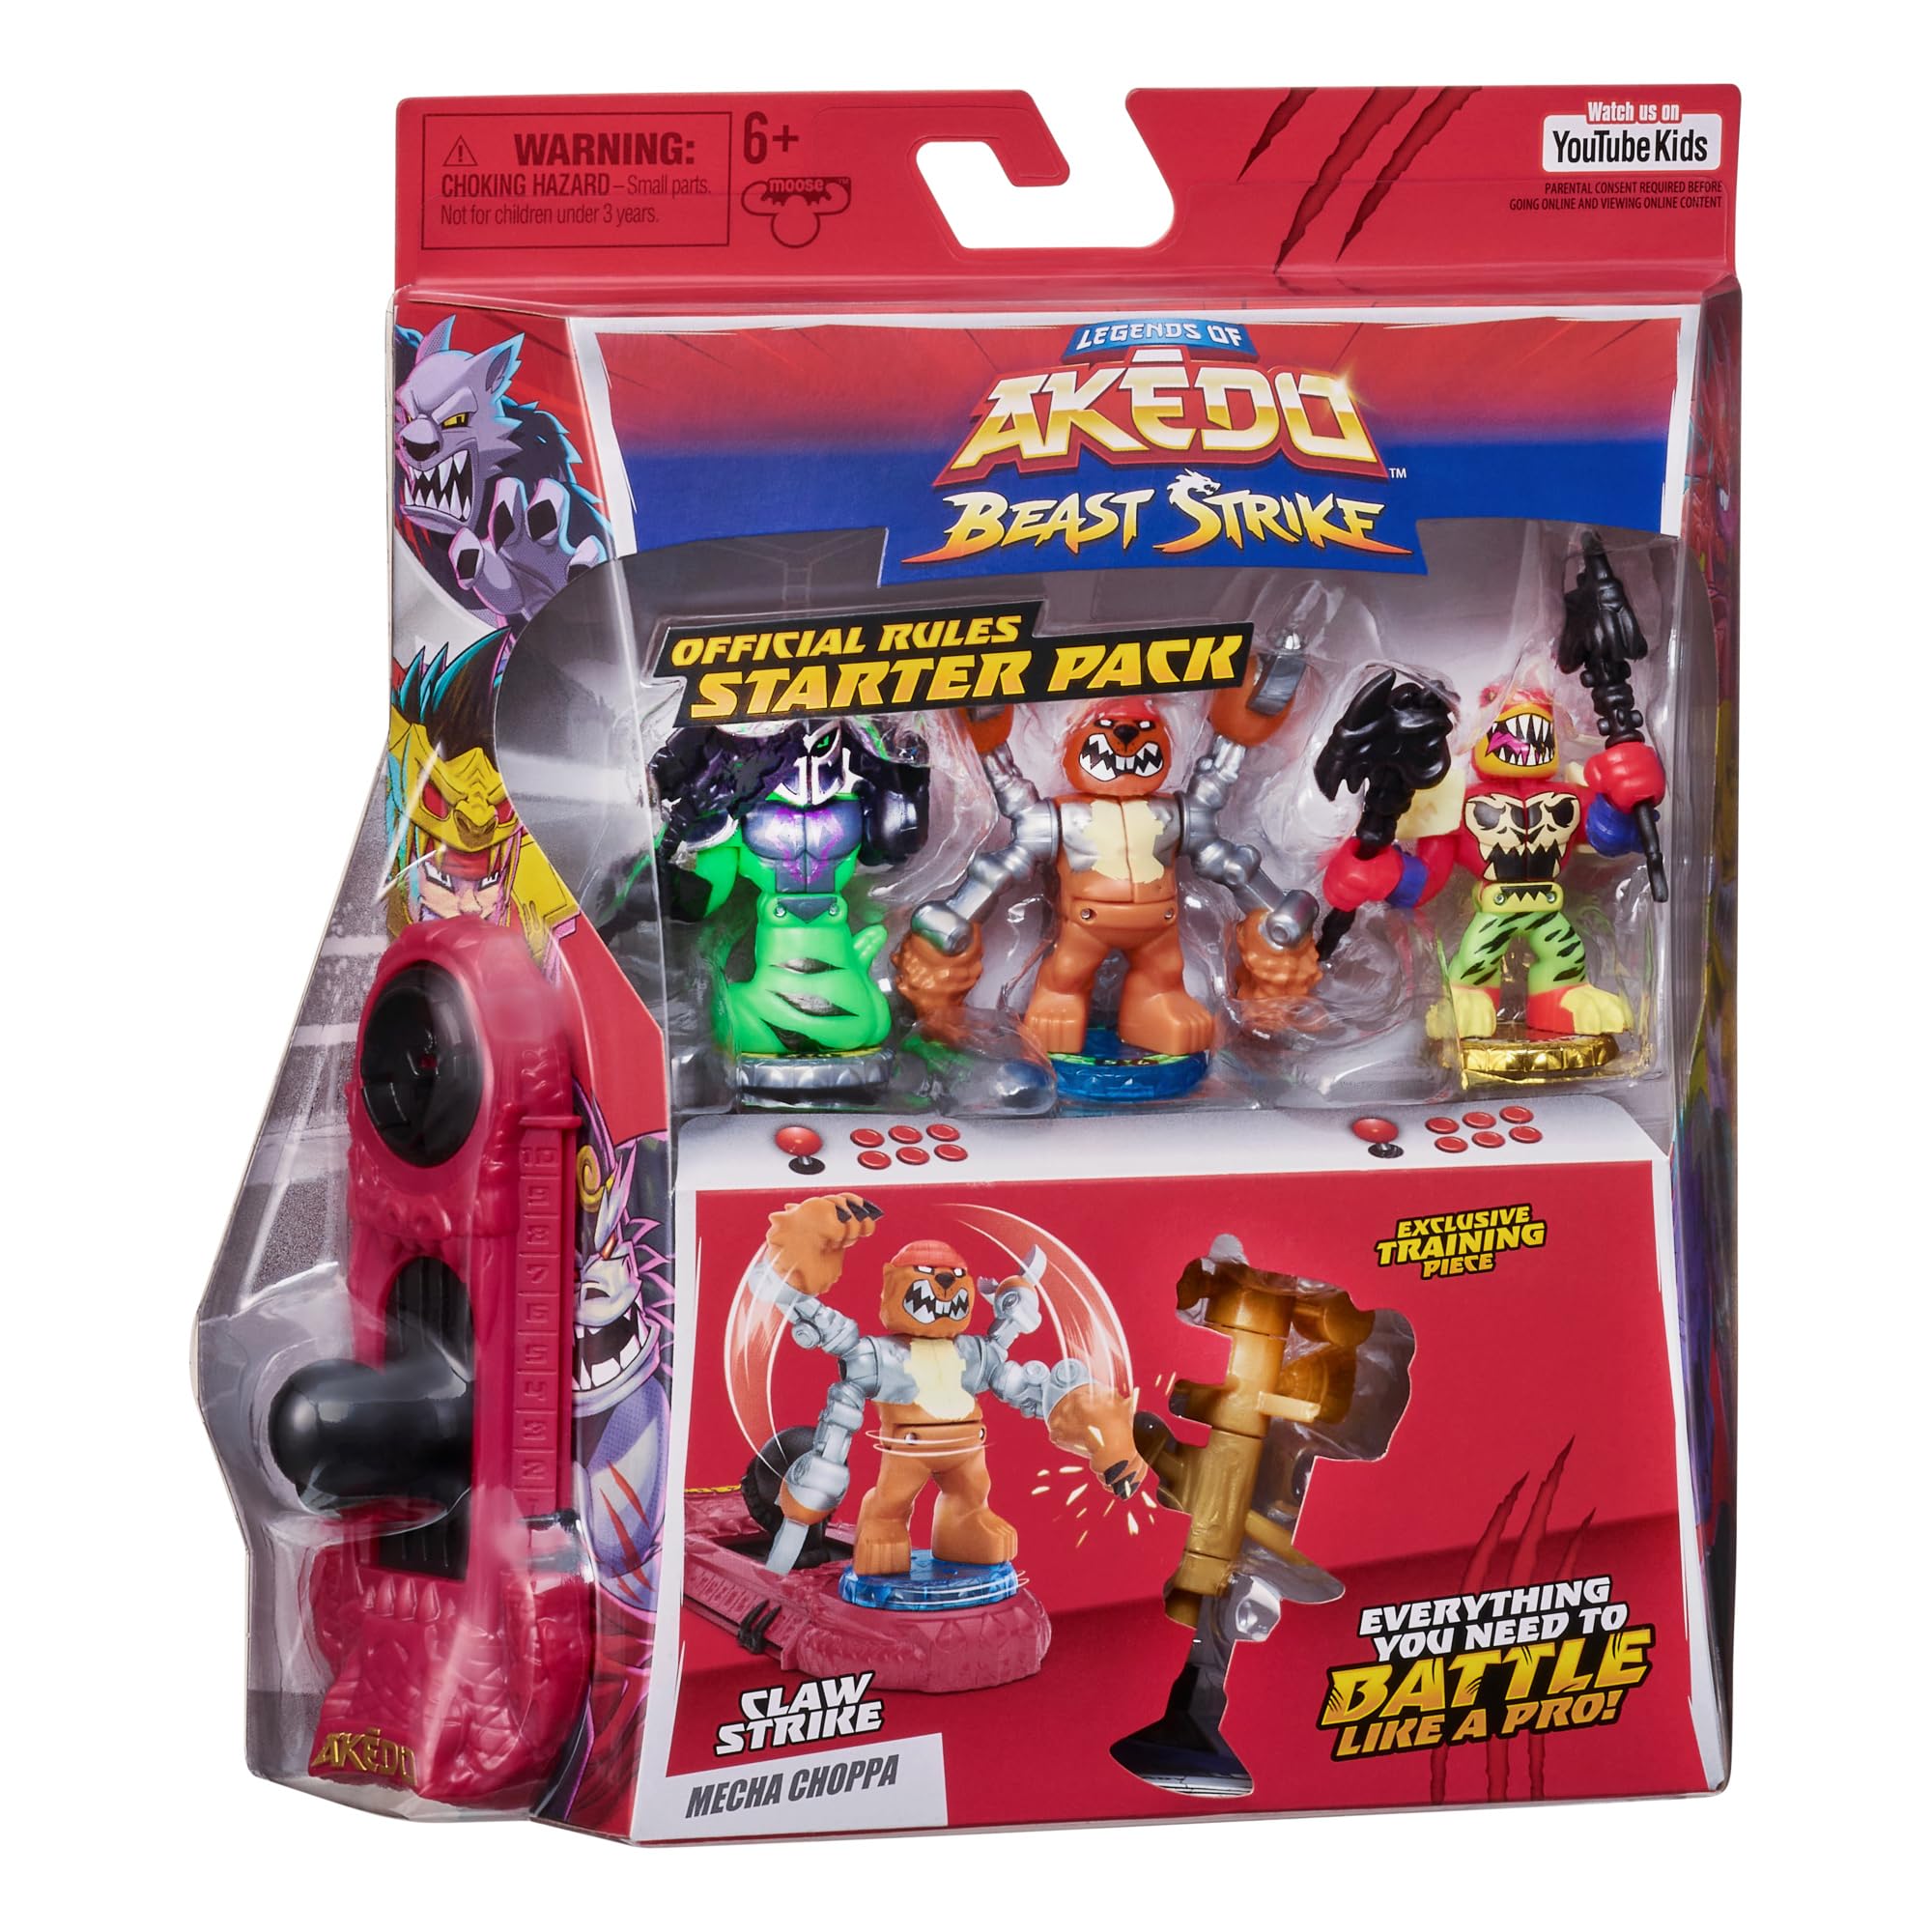 Legends of Akedo Beast Strike - Official Rules Claw Strike Starter Pack - 3 Mini Battling Warriors with Training Practice Piece and Exclusive Joystick Controller